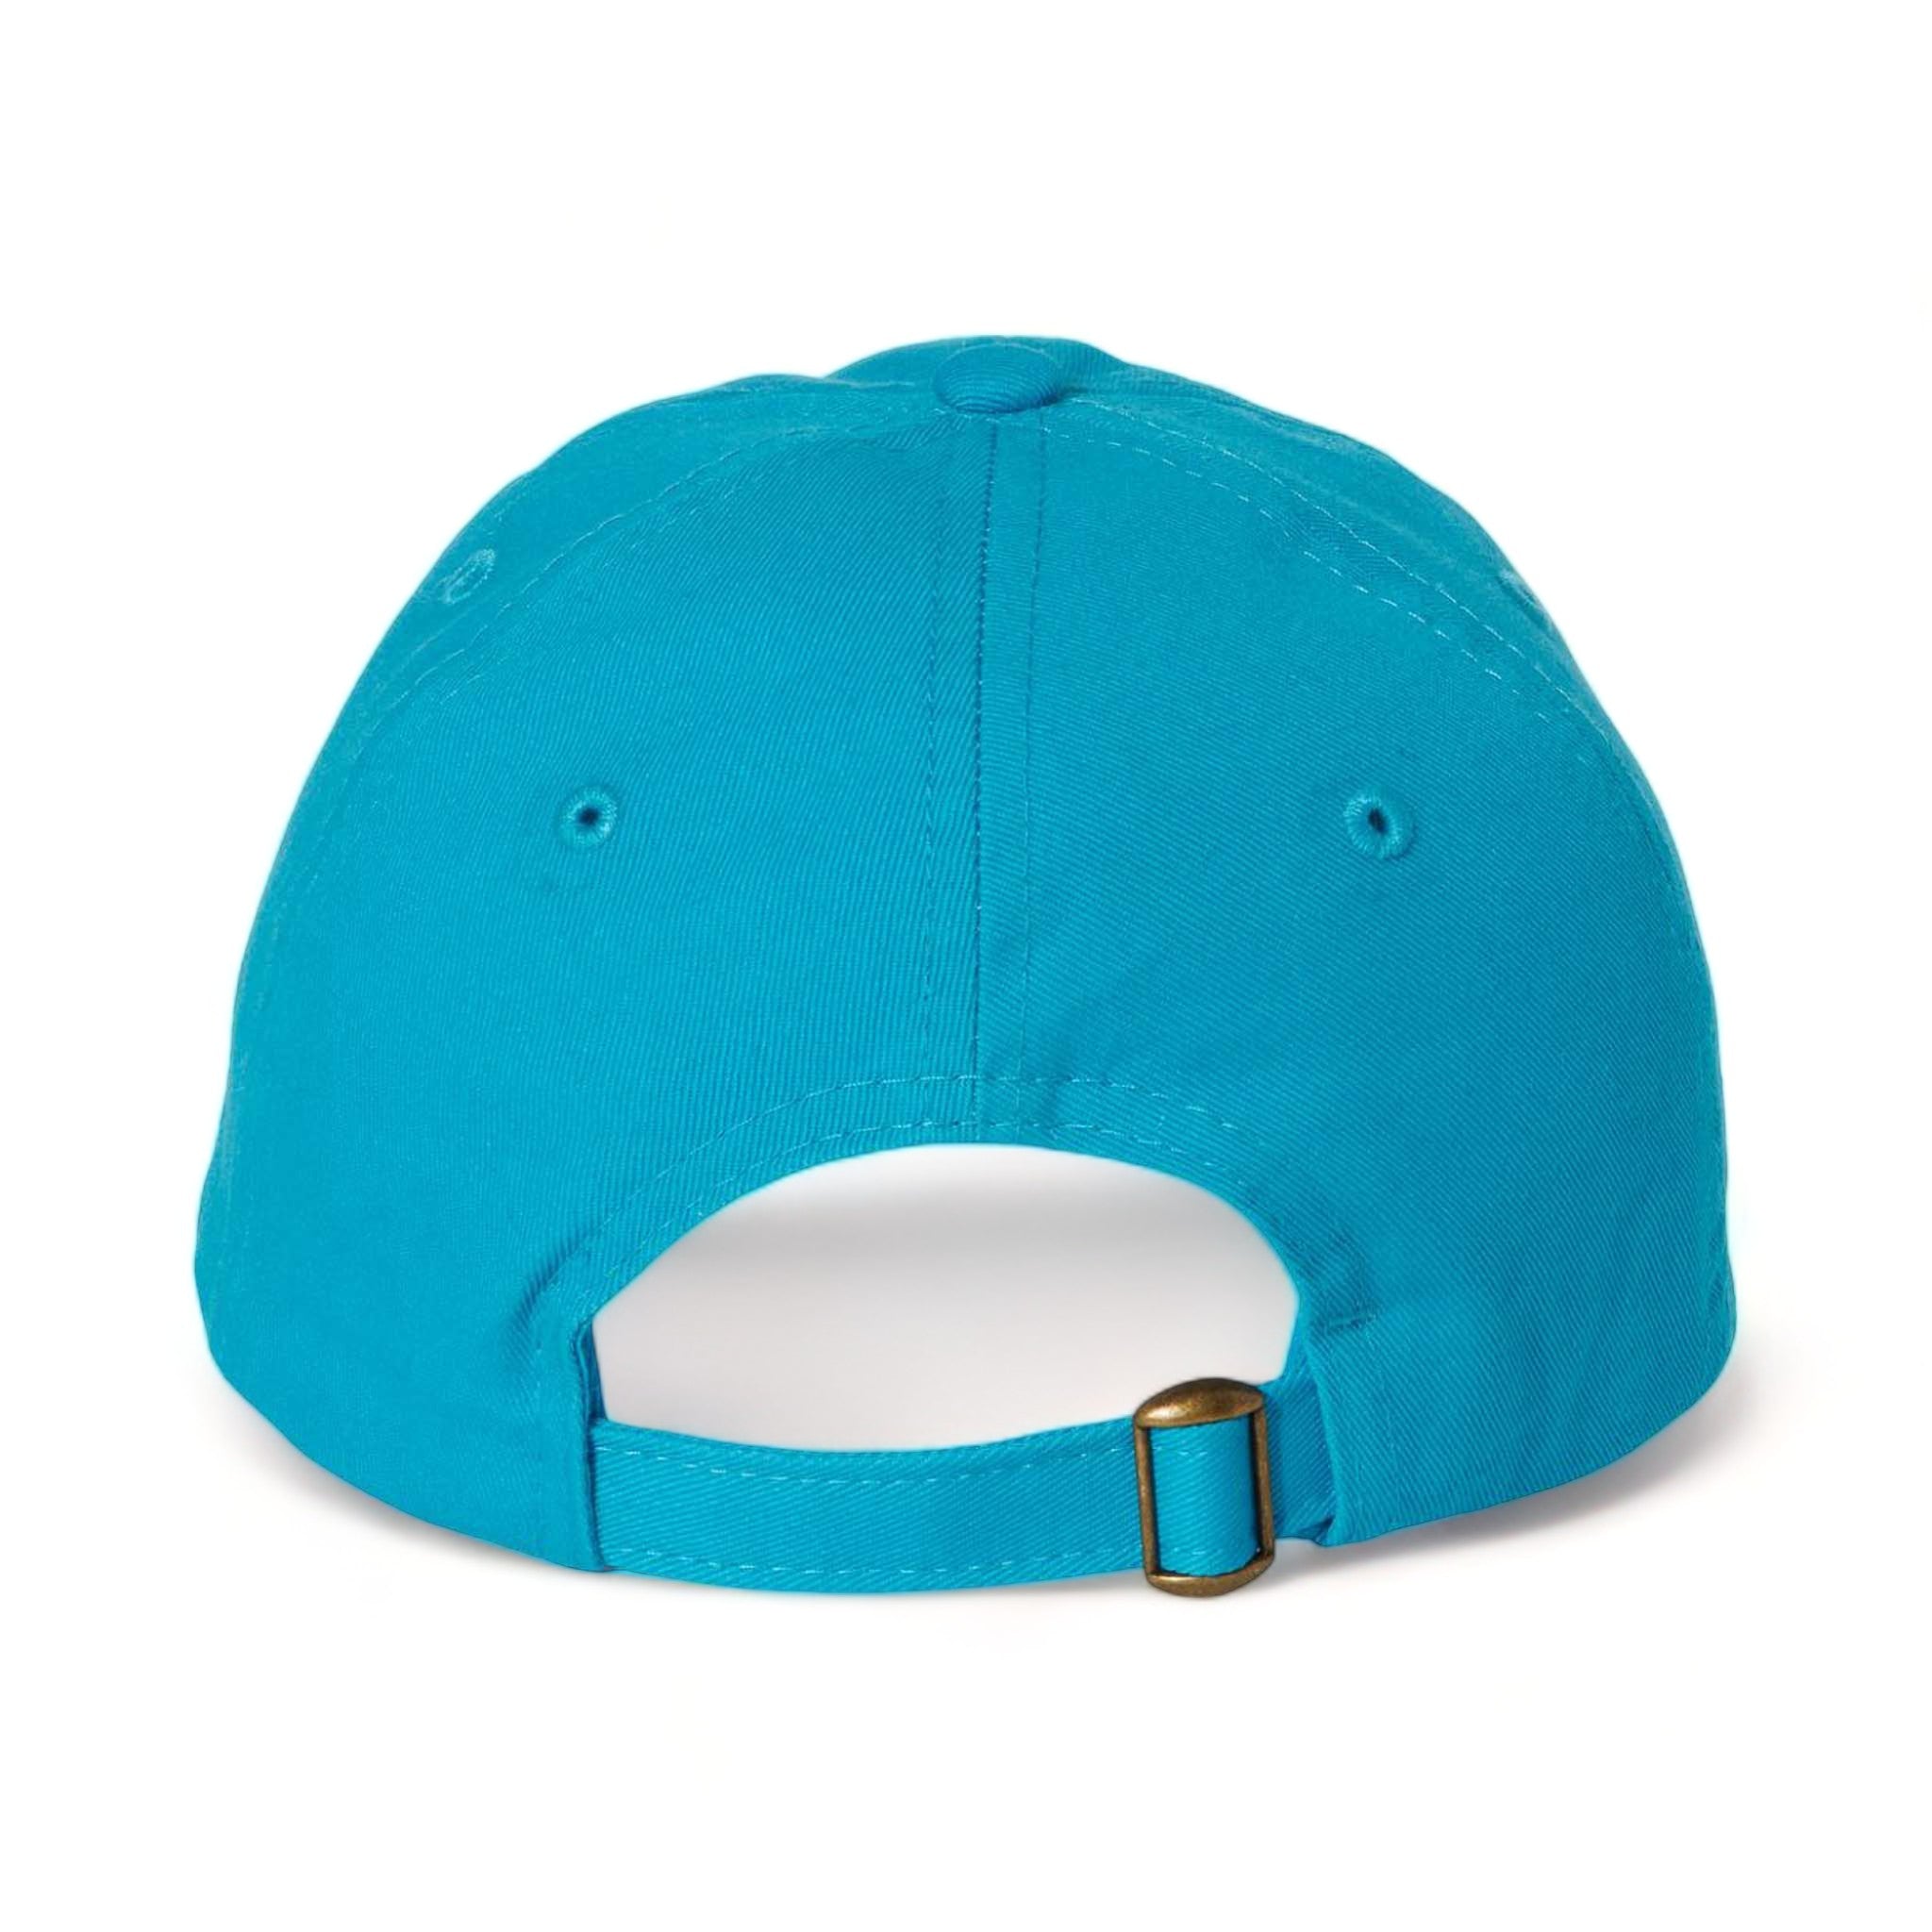 Back view of Valucap VC300A custom hat in neon blue